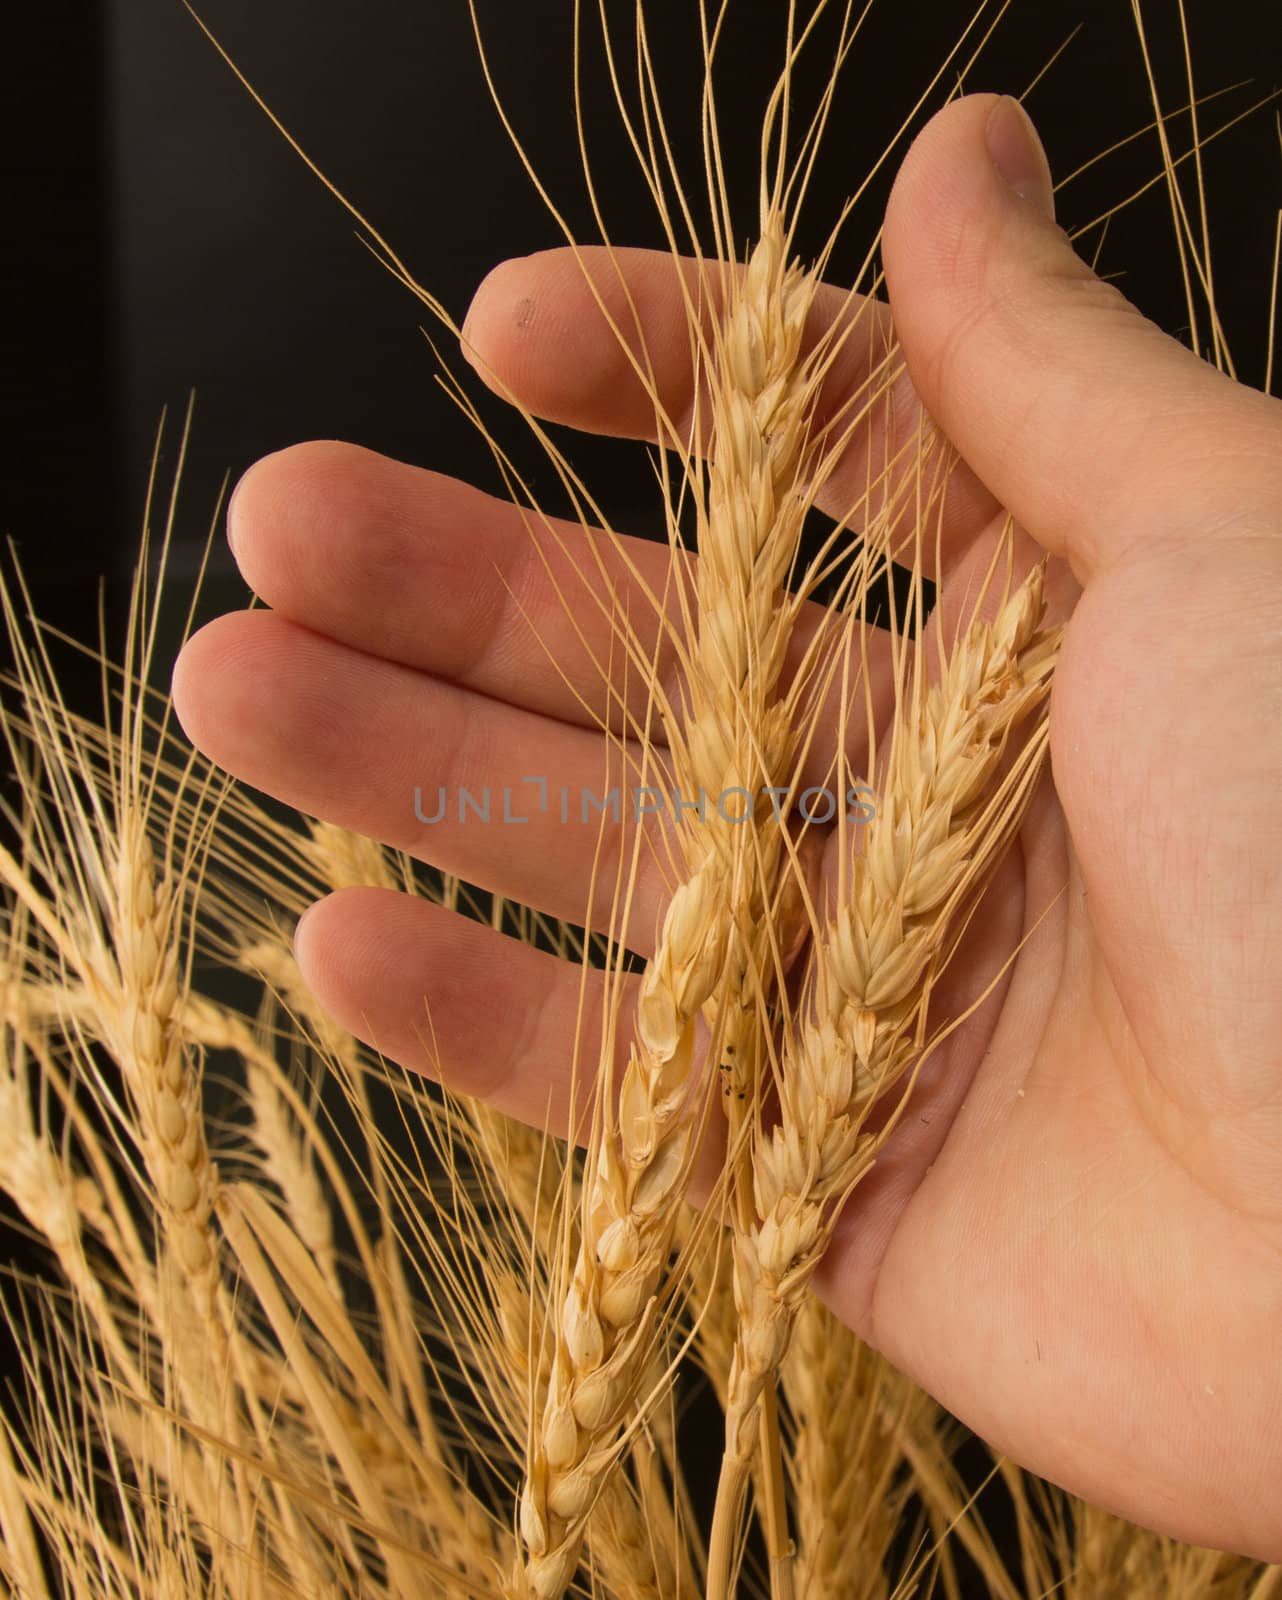 Wheat in a hand on a black background by schankz